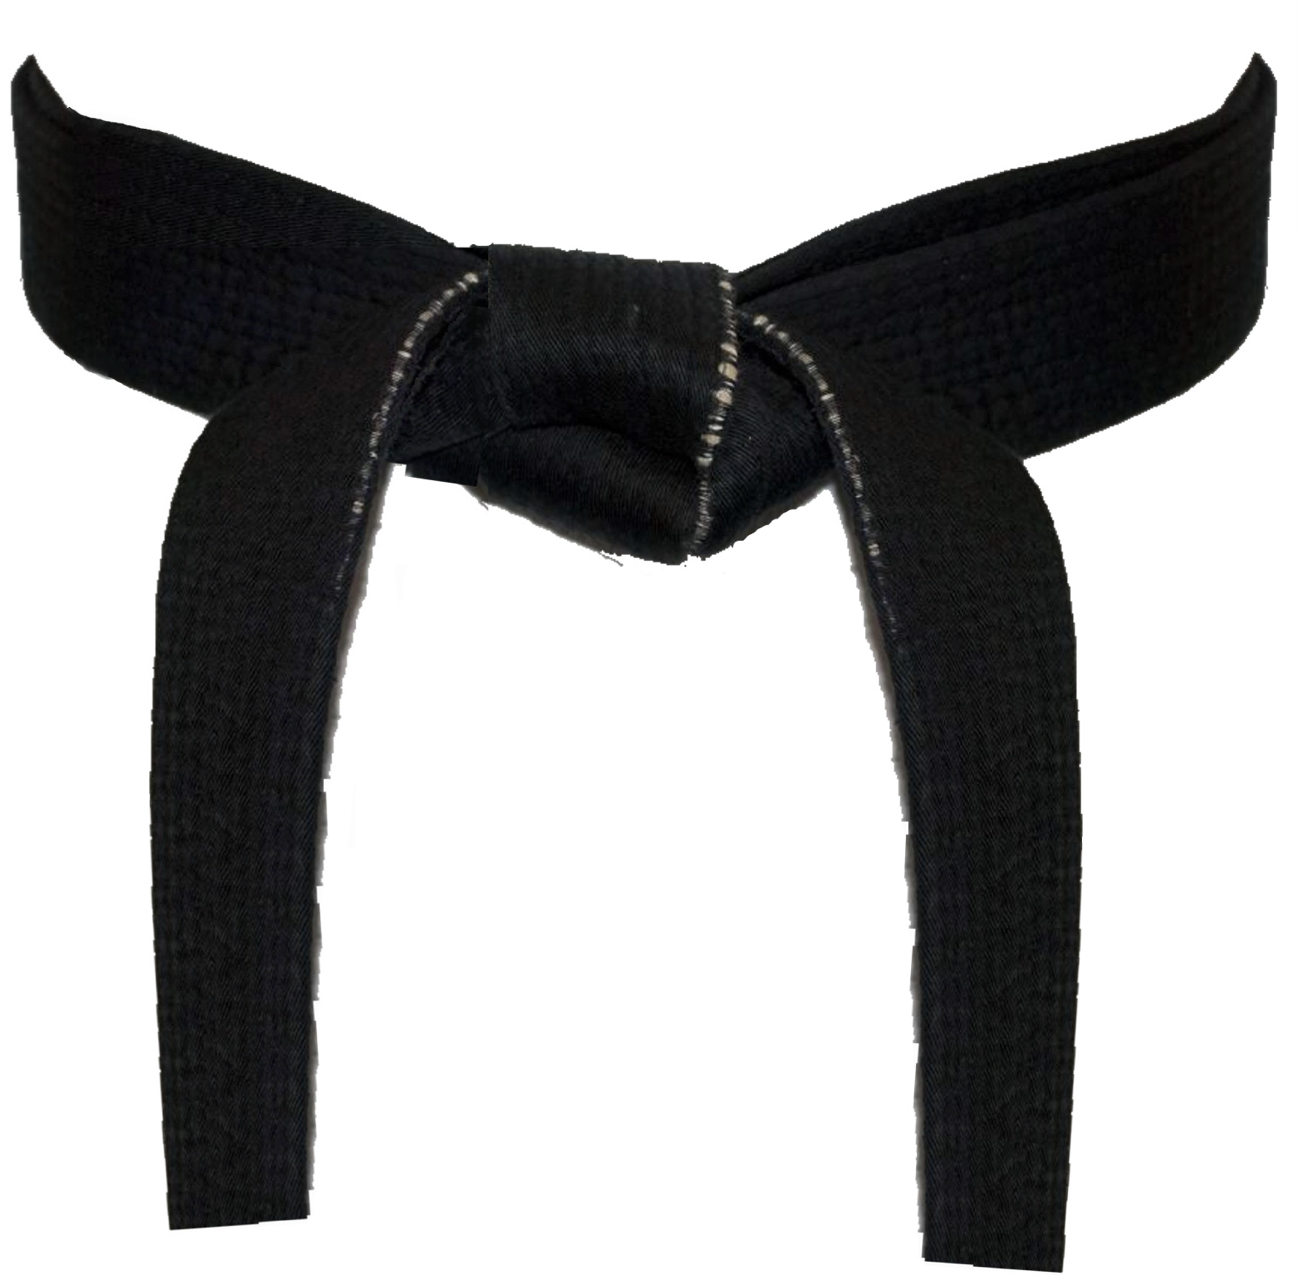 Karate Questions and Answers: Are you comfortable wearing your black belt?